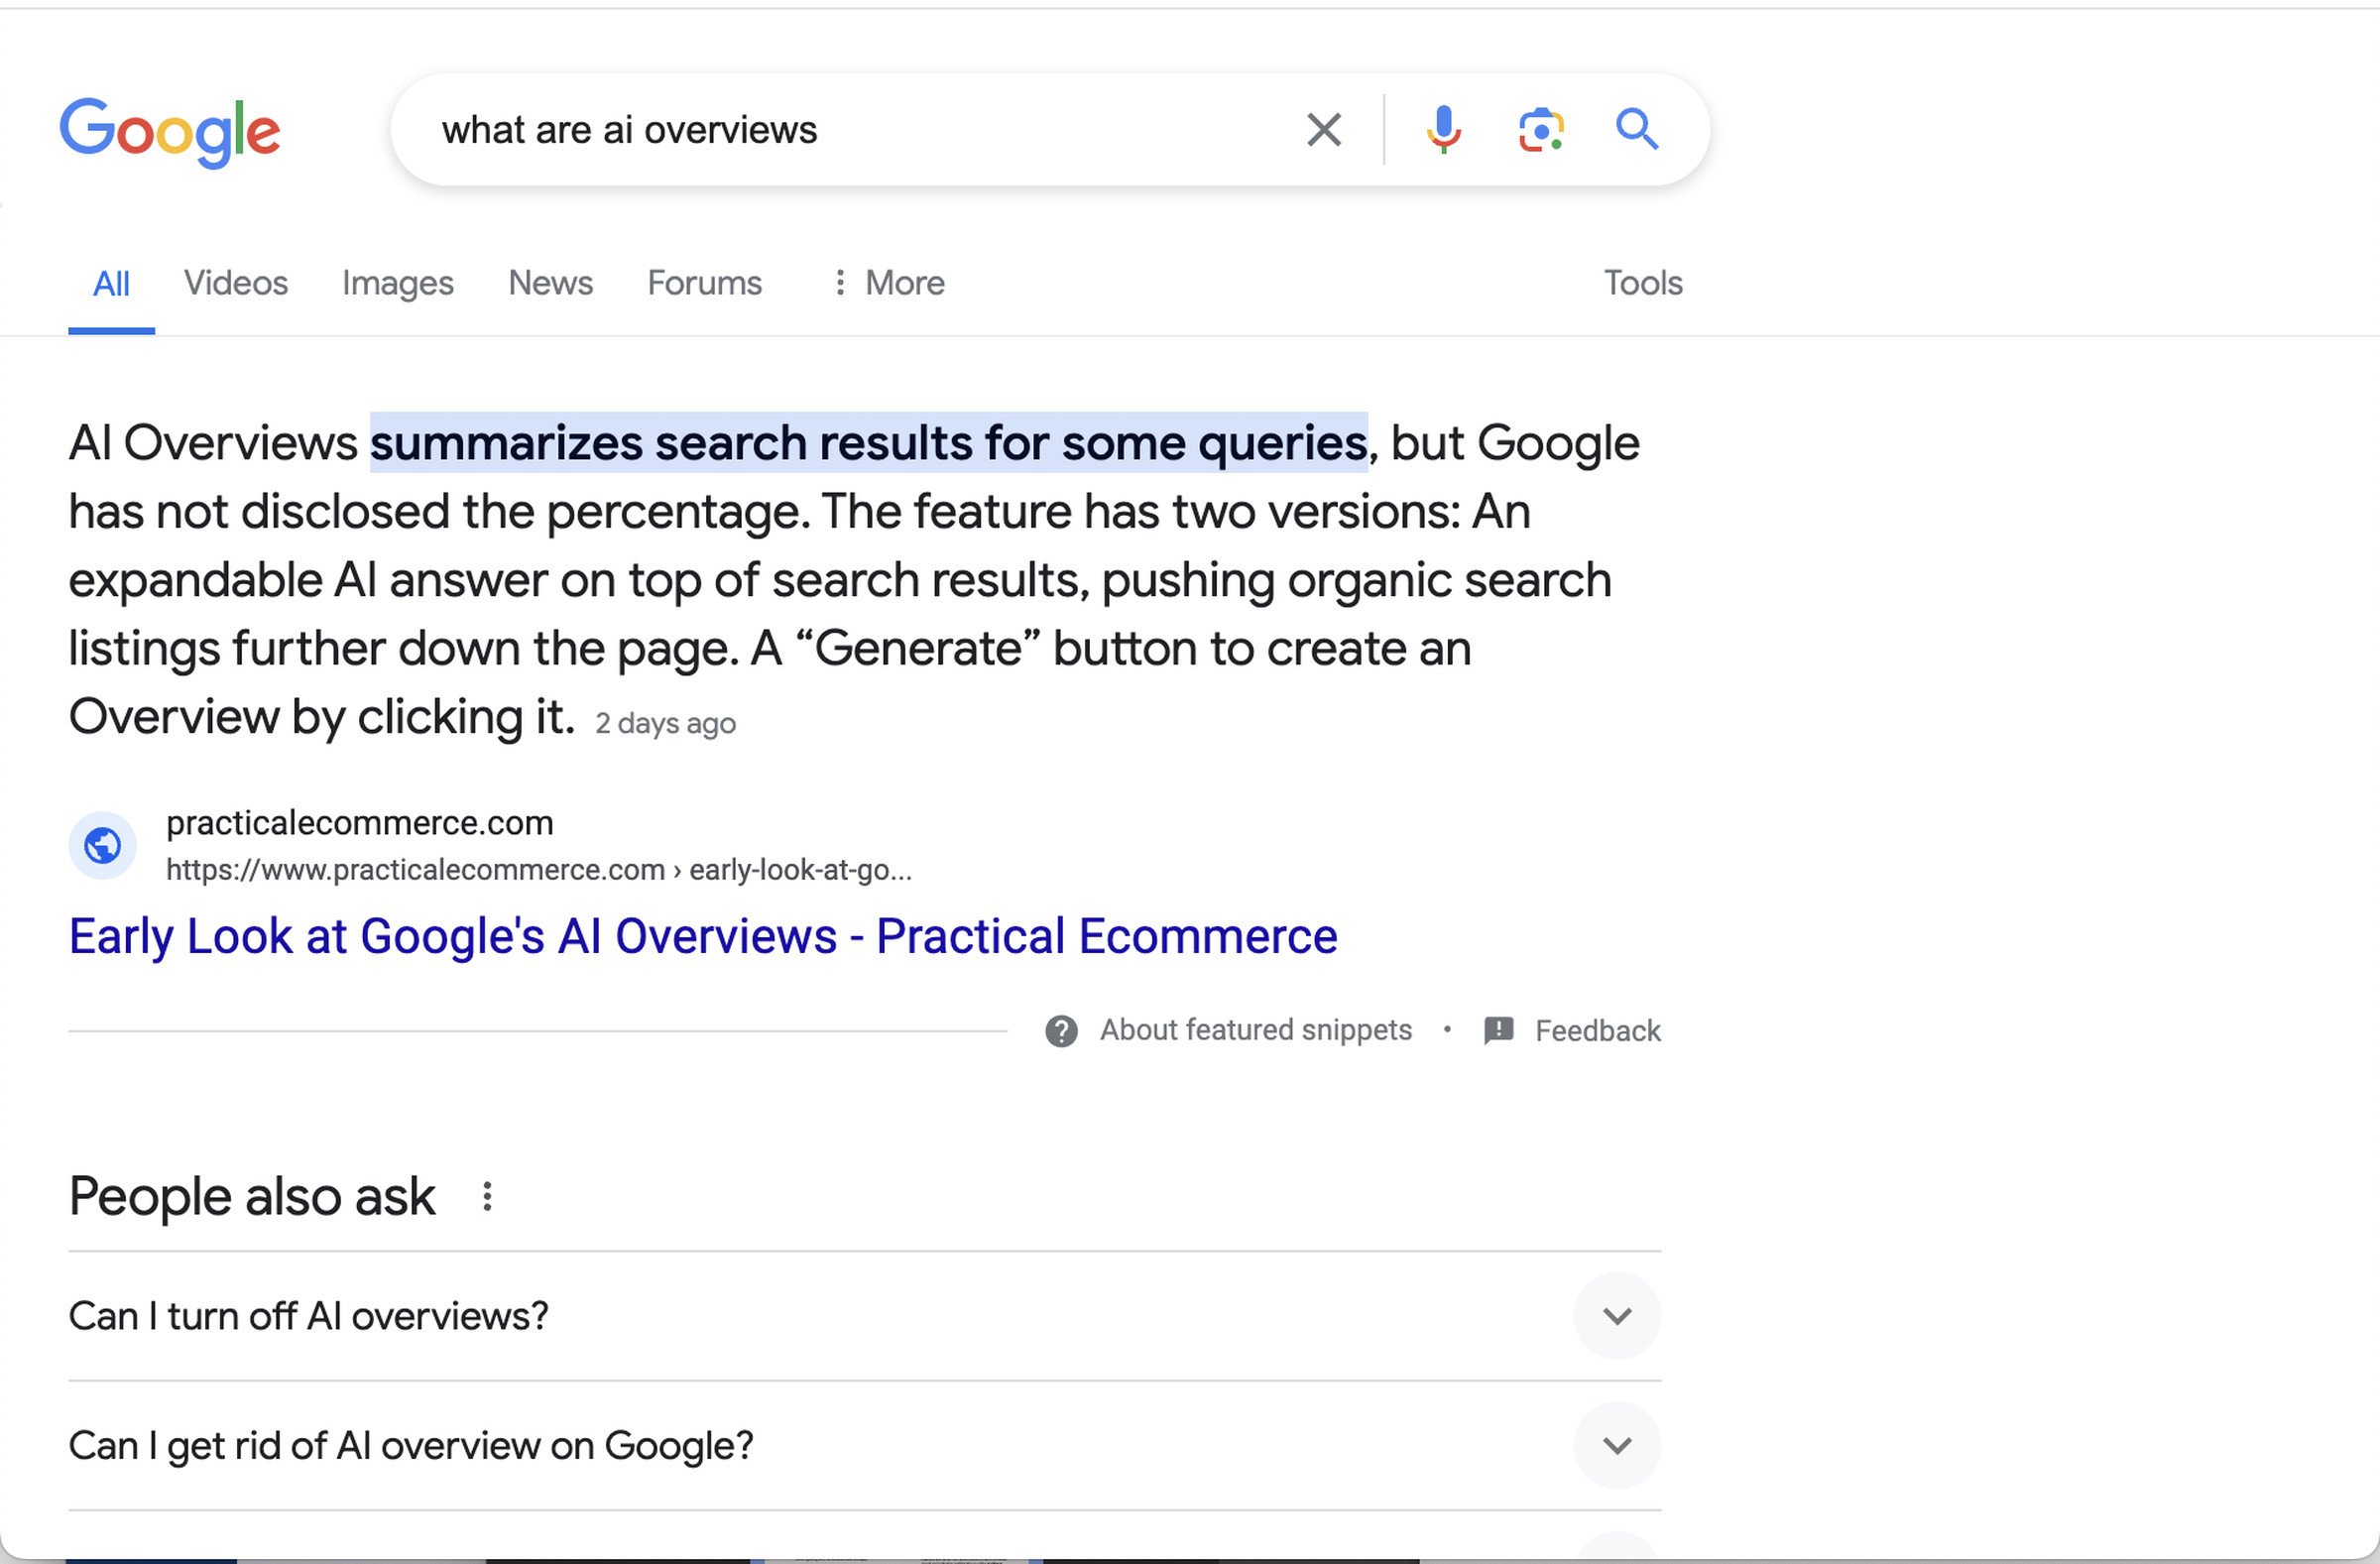 The Google search page with an AI Overview at top.